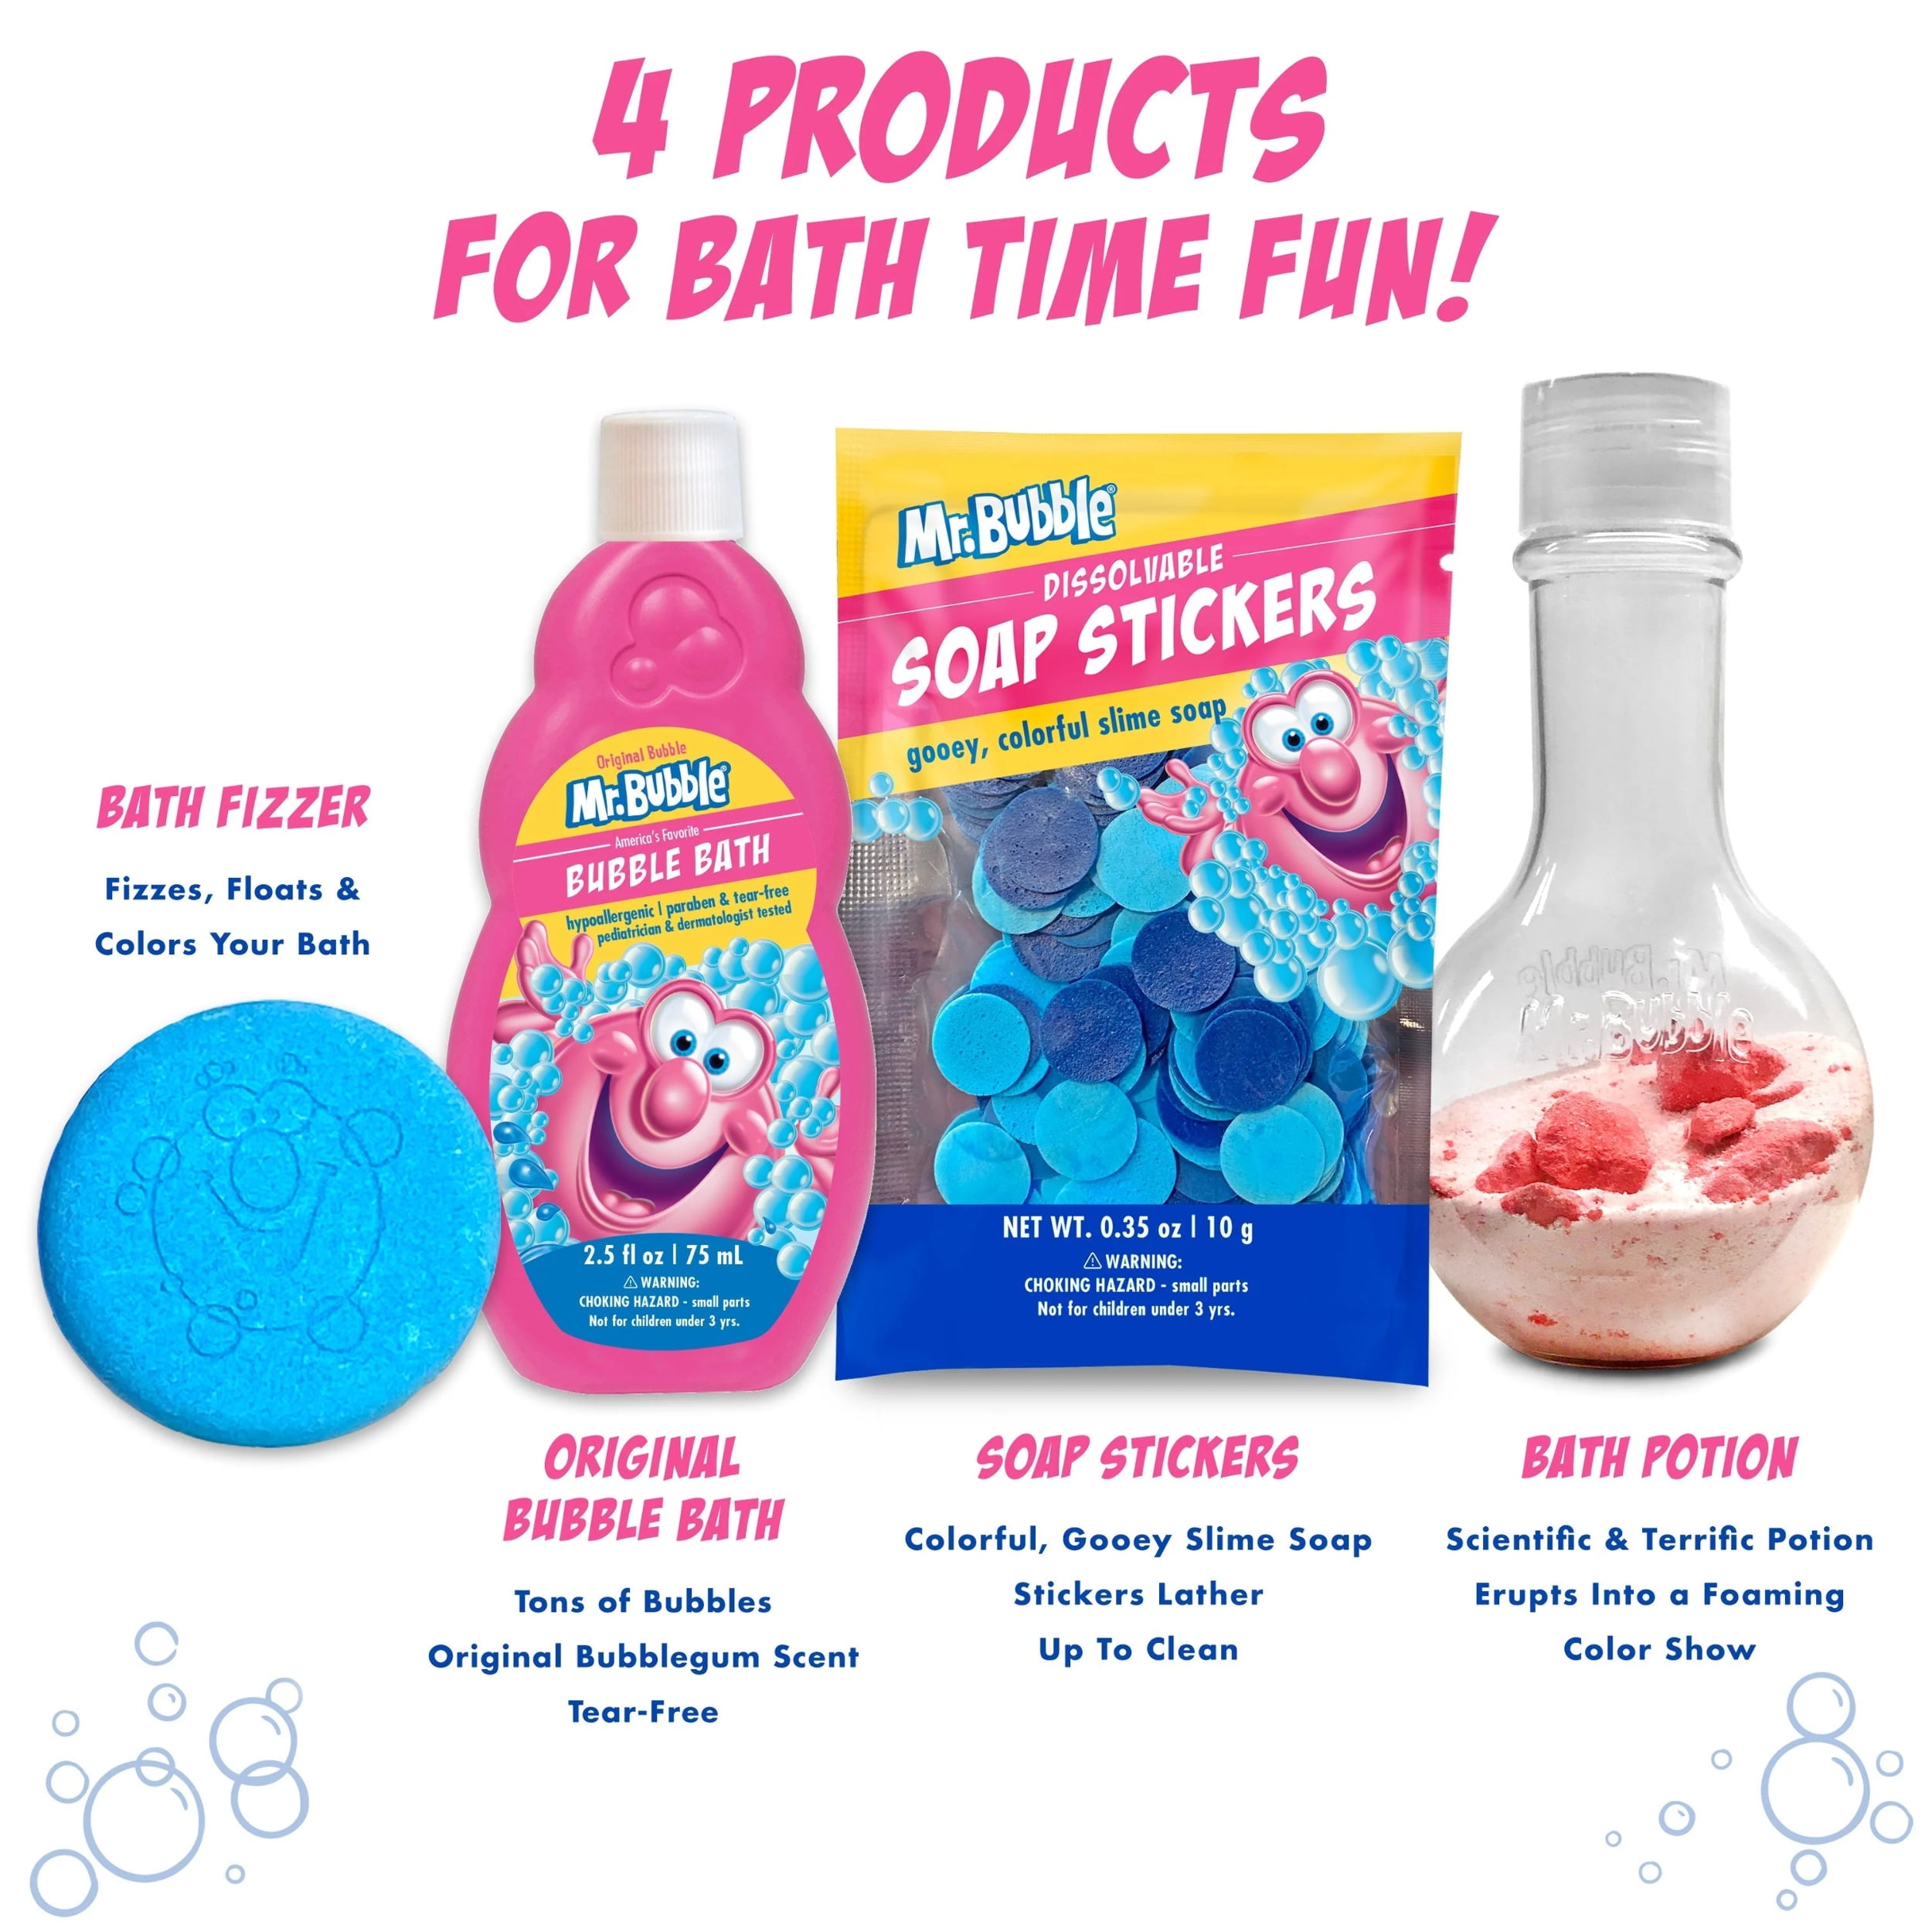 Mr. Bubble Twin Pack Foam Soap - Create Kids Bath Slime, Sculpt Mountains  of Soft, Fluffy, Moldable Soap - Gentle, Scented Gooey Foam Perfect for  Sensitive Skin (Pack of 2, 8 fl oz Each)